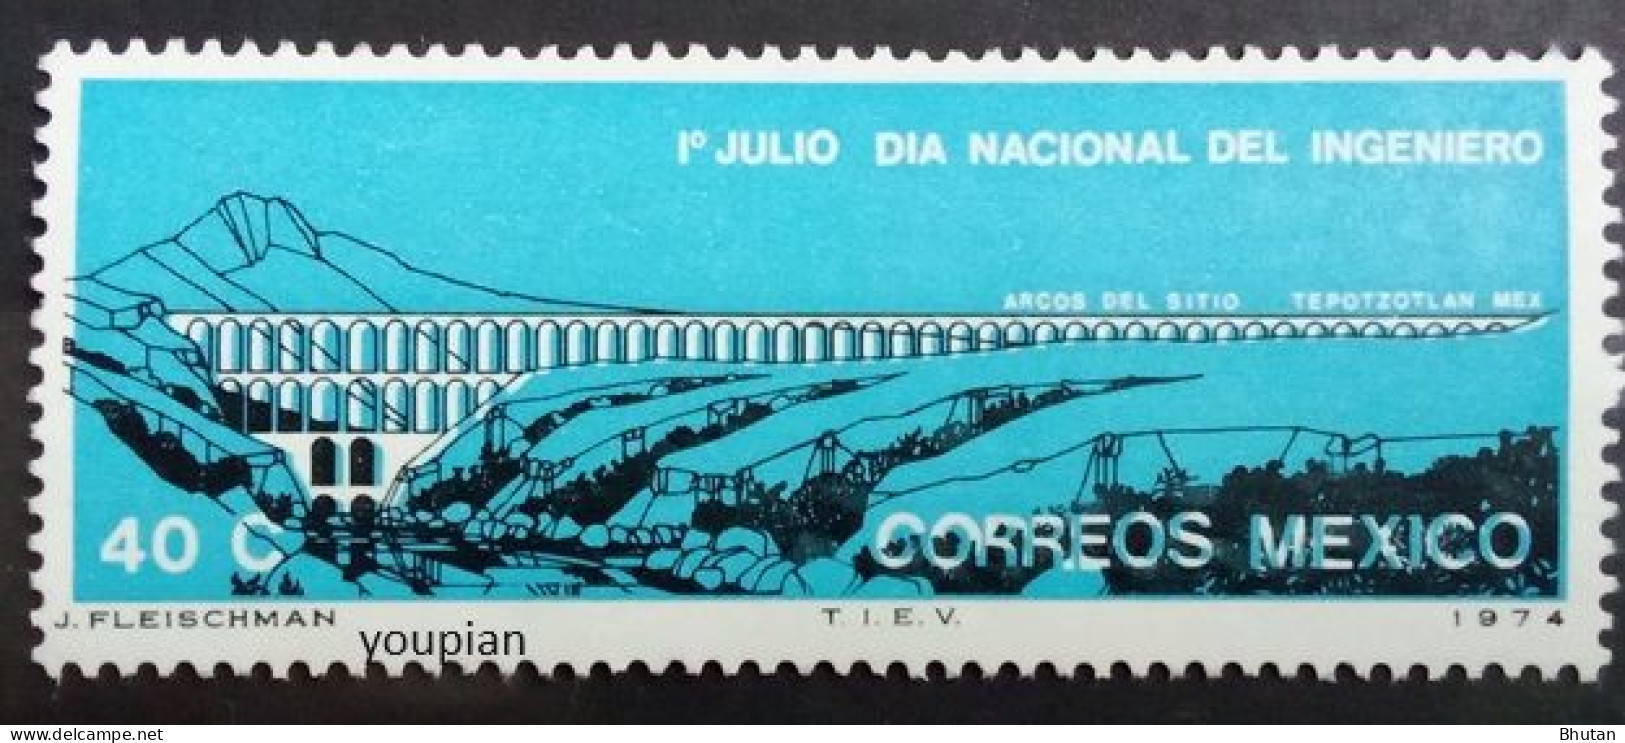 Mexico 1974, Day Of The Engineer, MNH Single Stamp - Mexiko